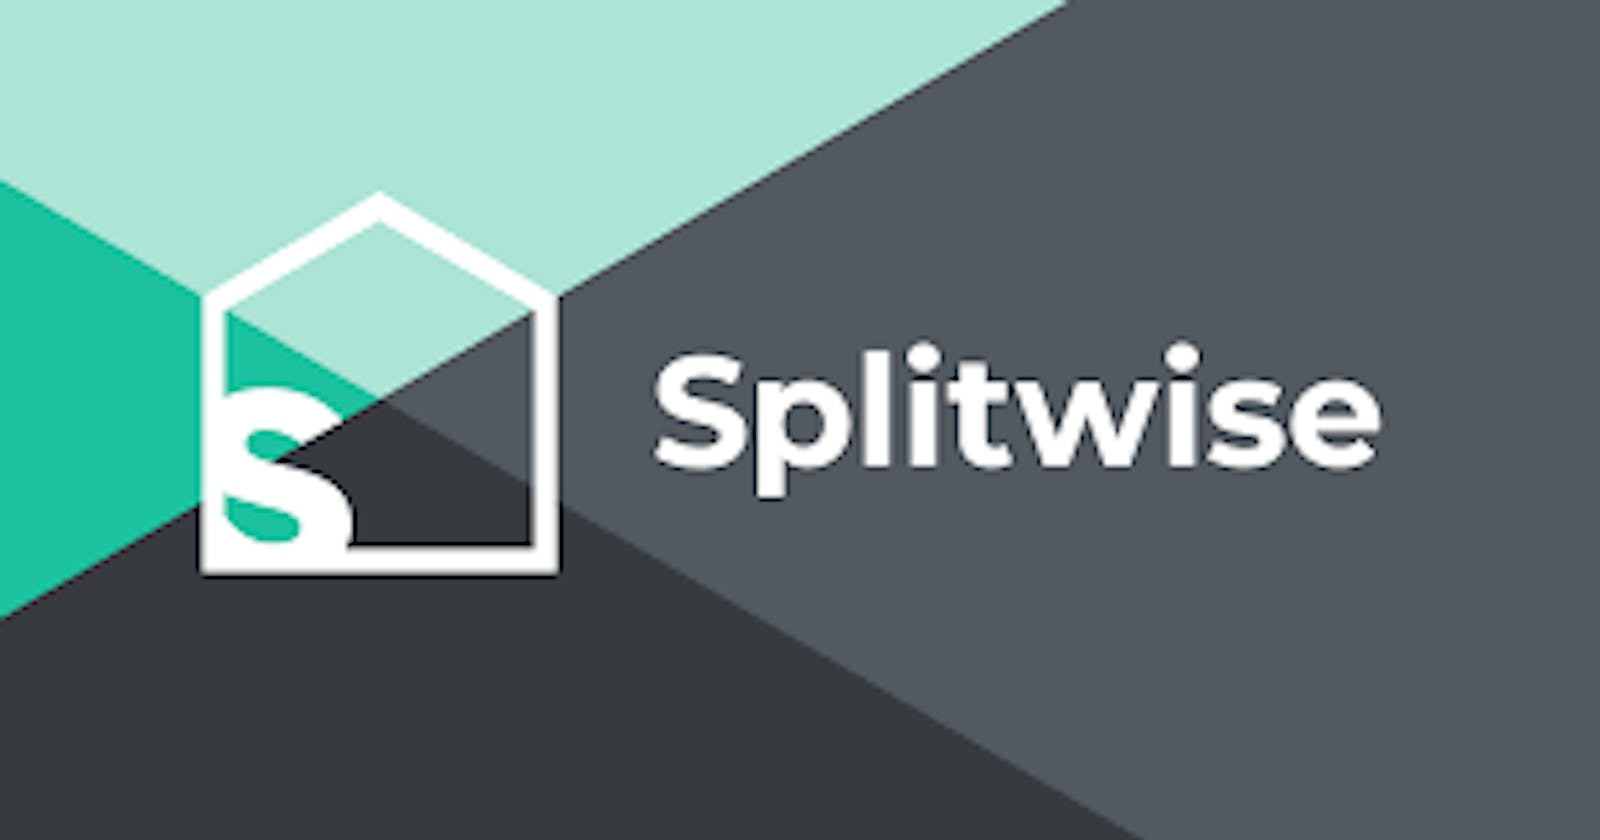 Splitwise Clone App in less than 4 days.